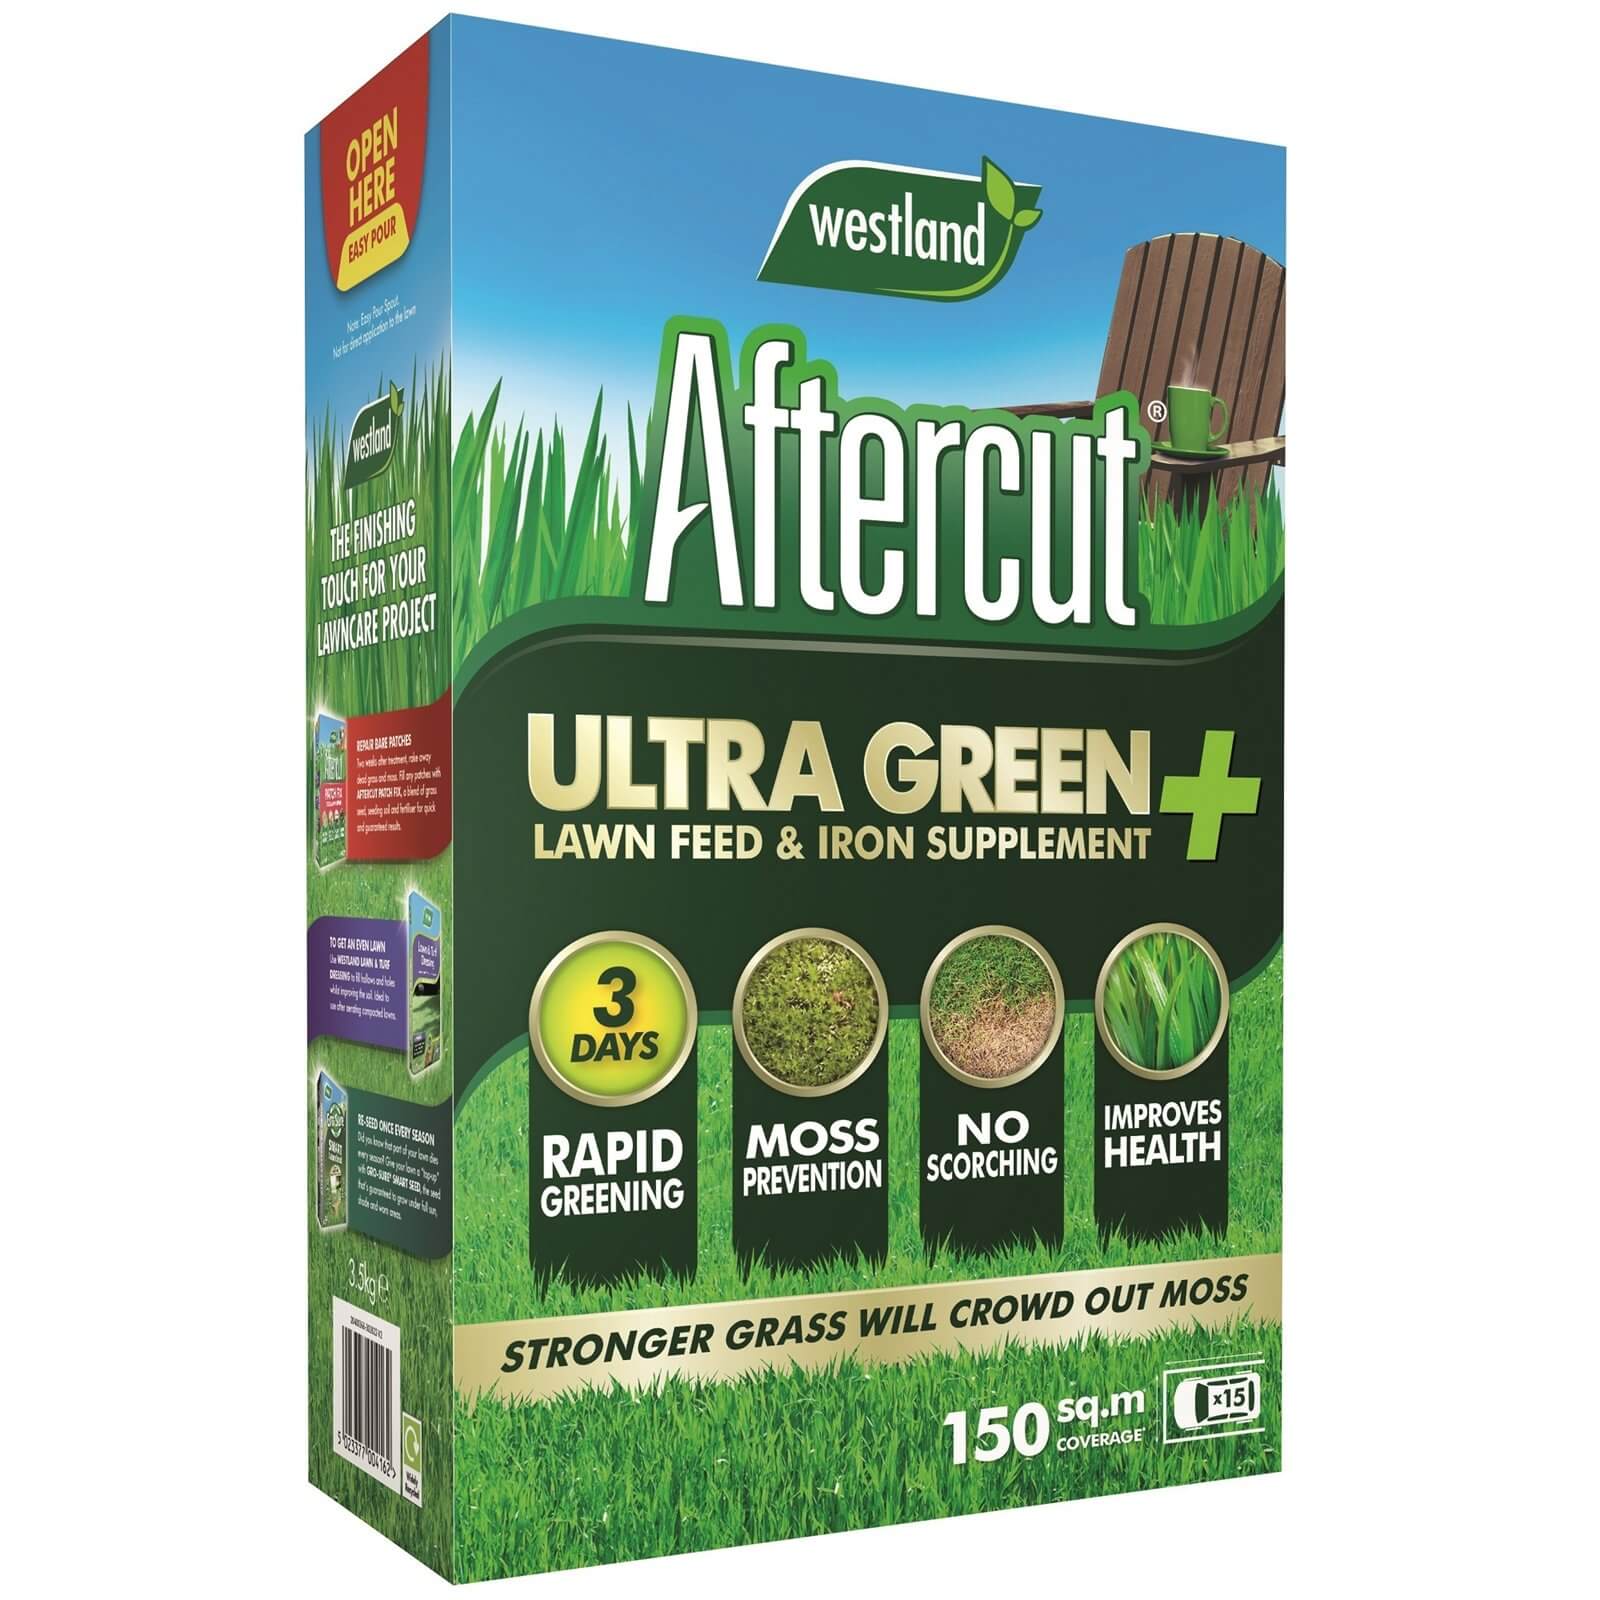 Photo of Aftercut Ultra Green + Lawn Feed & Iron Supplement - 150m²